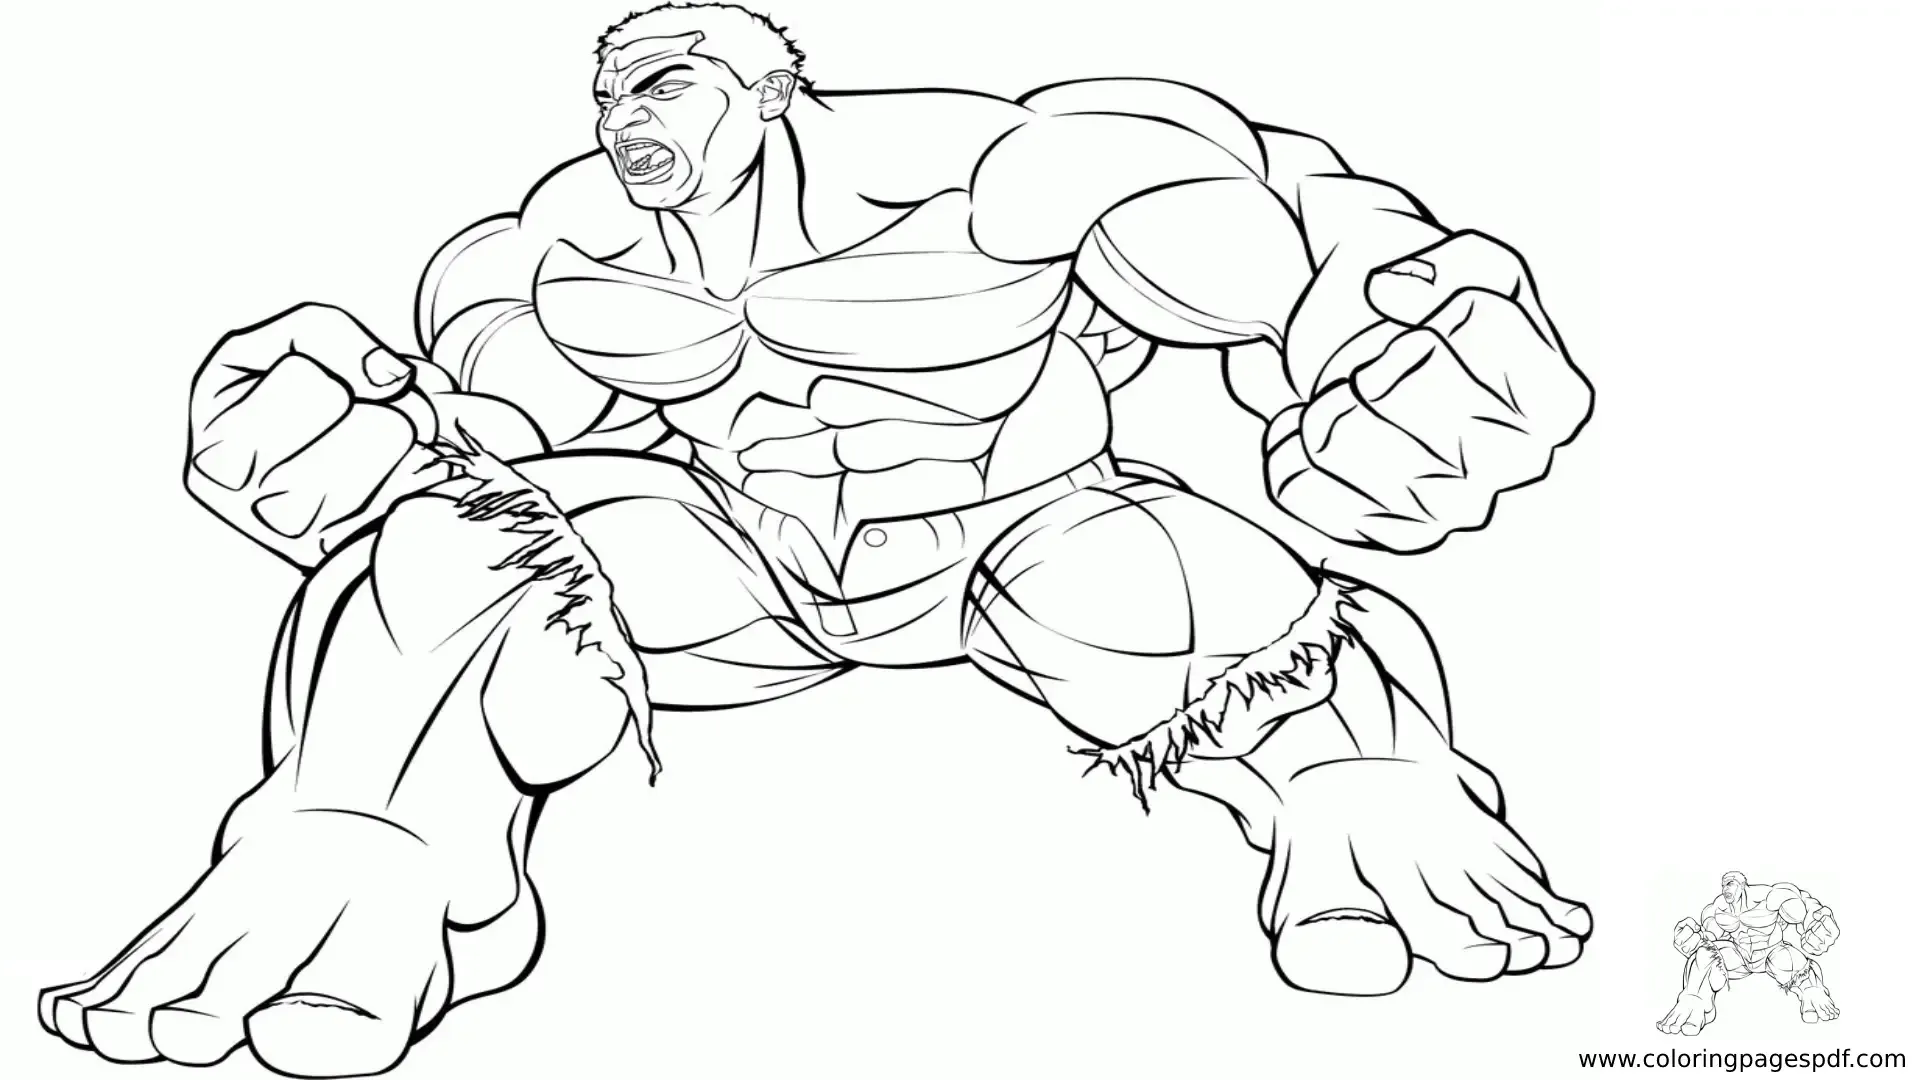 Coloring Pages Of Hulk In Fighting Position